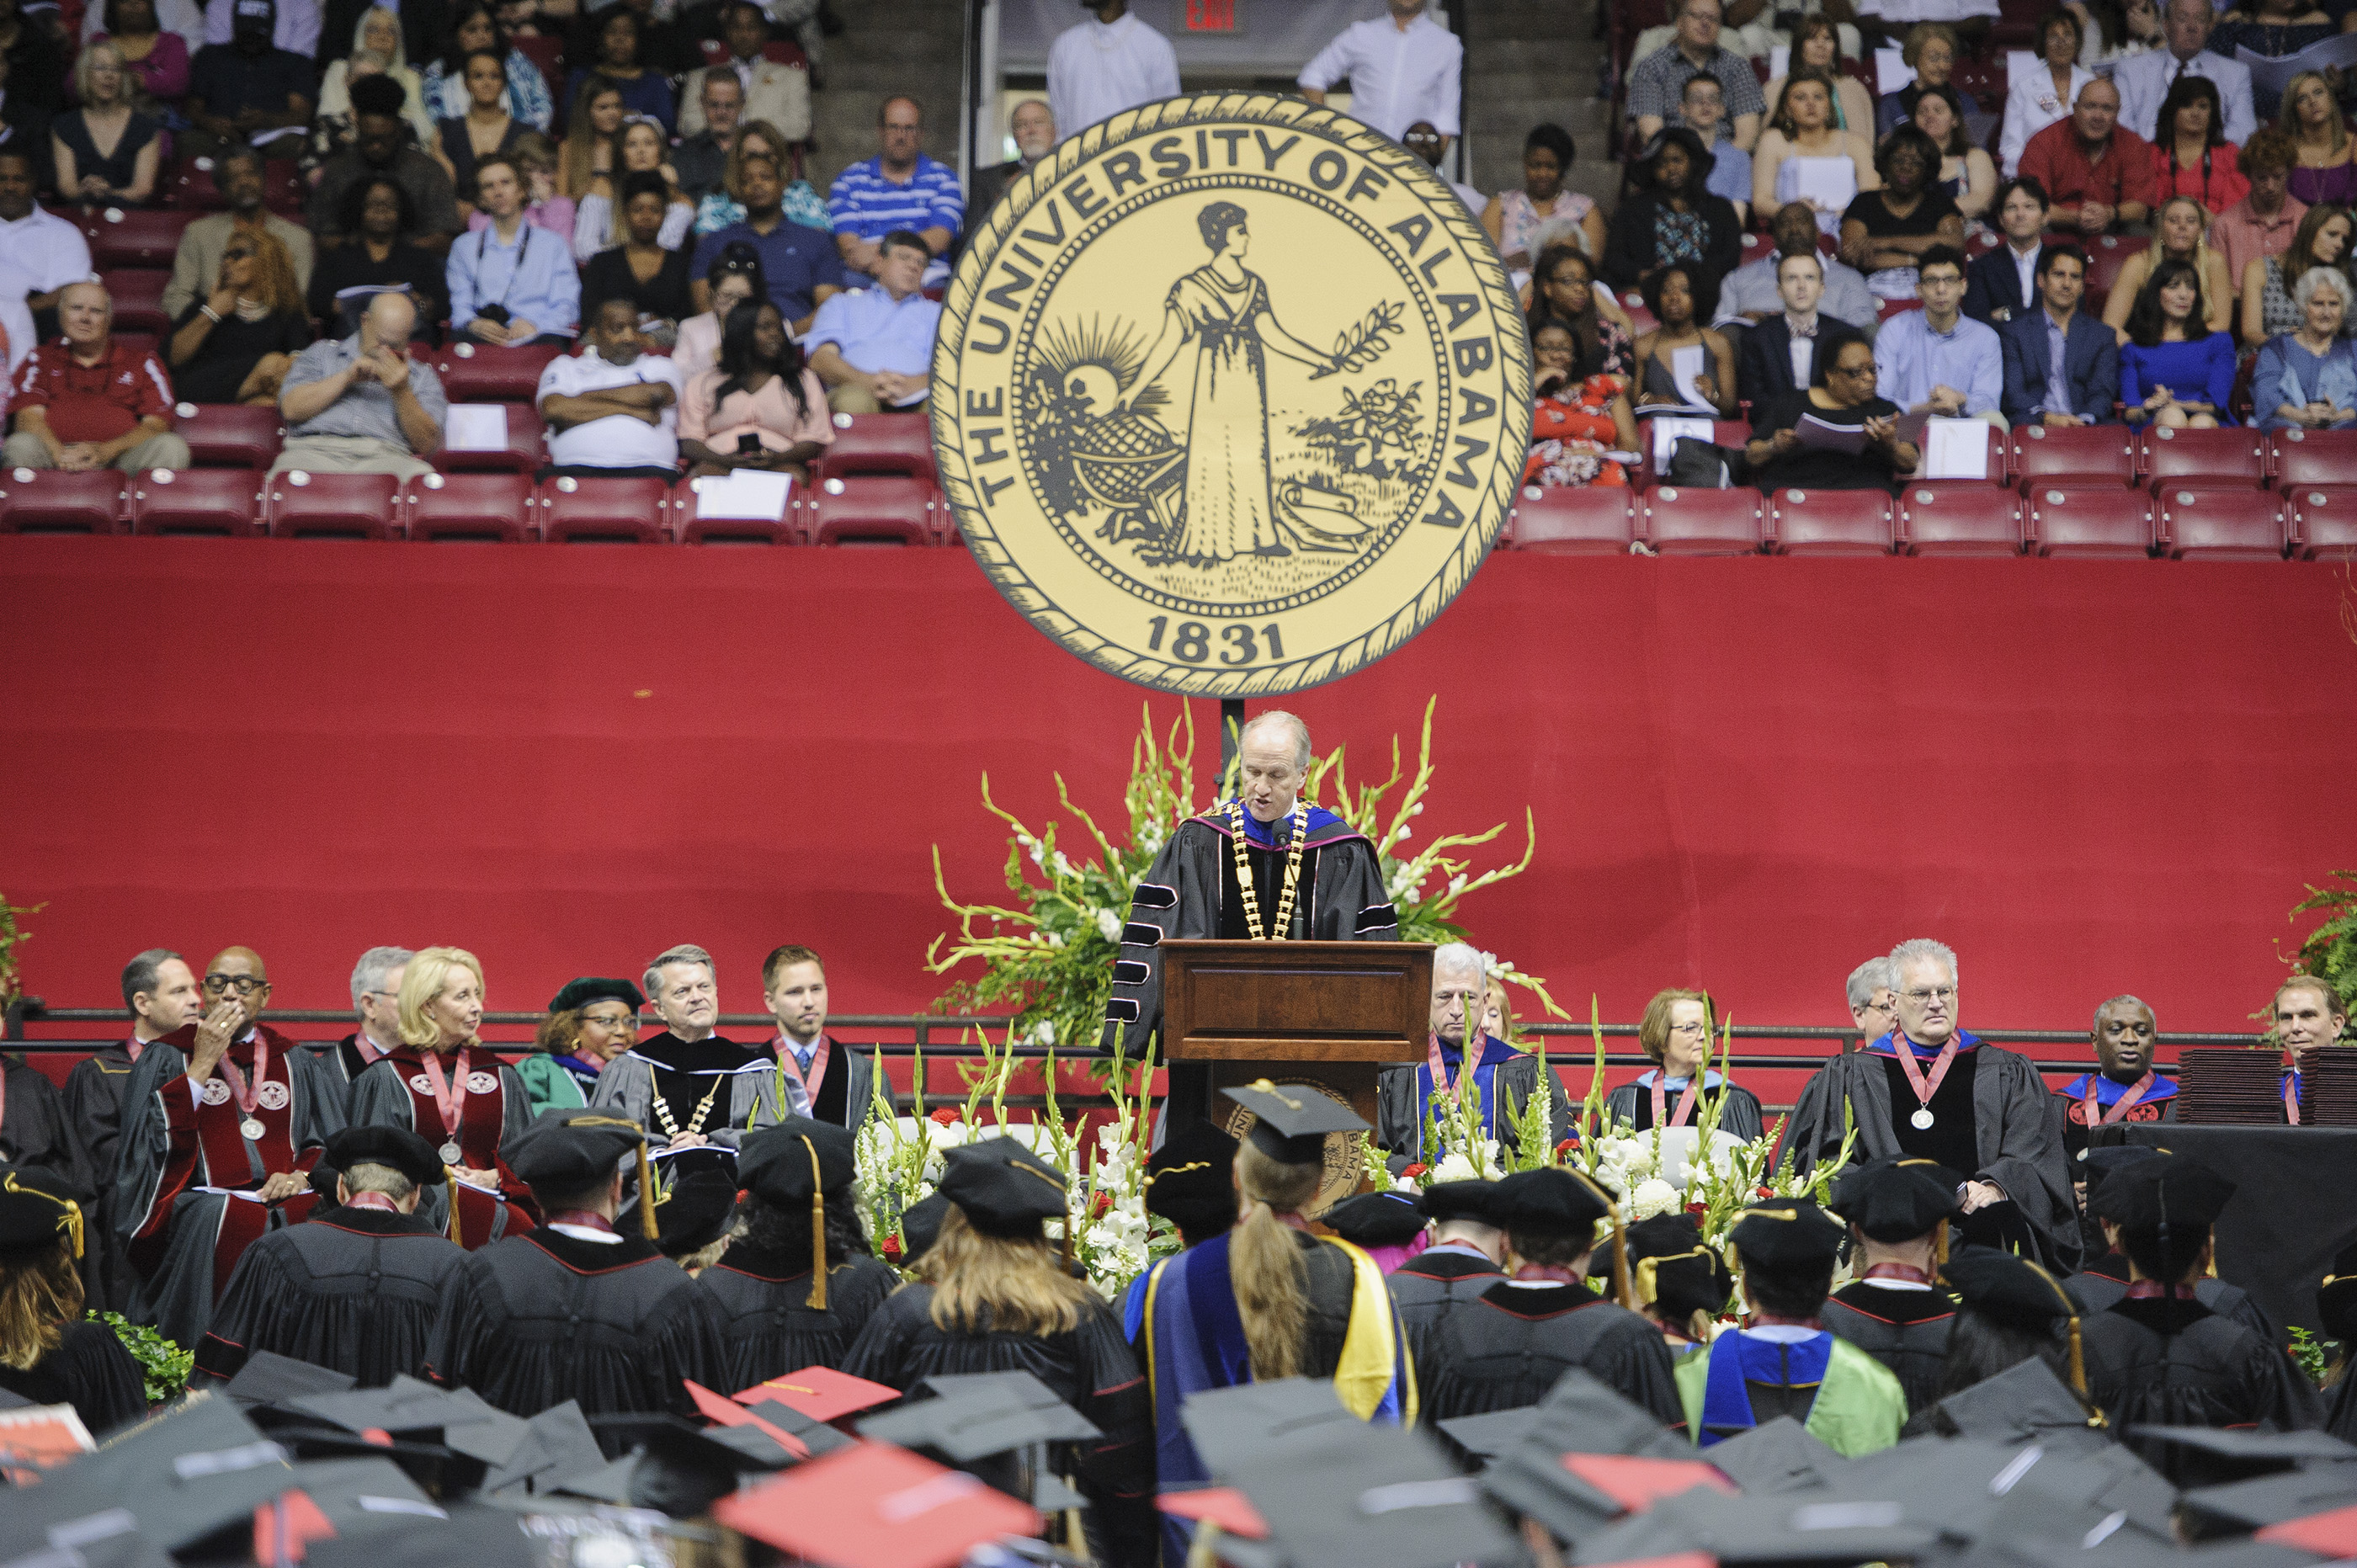 Commencement Ceremony with Dr. Bell at the podium